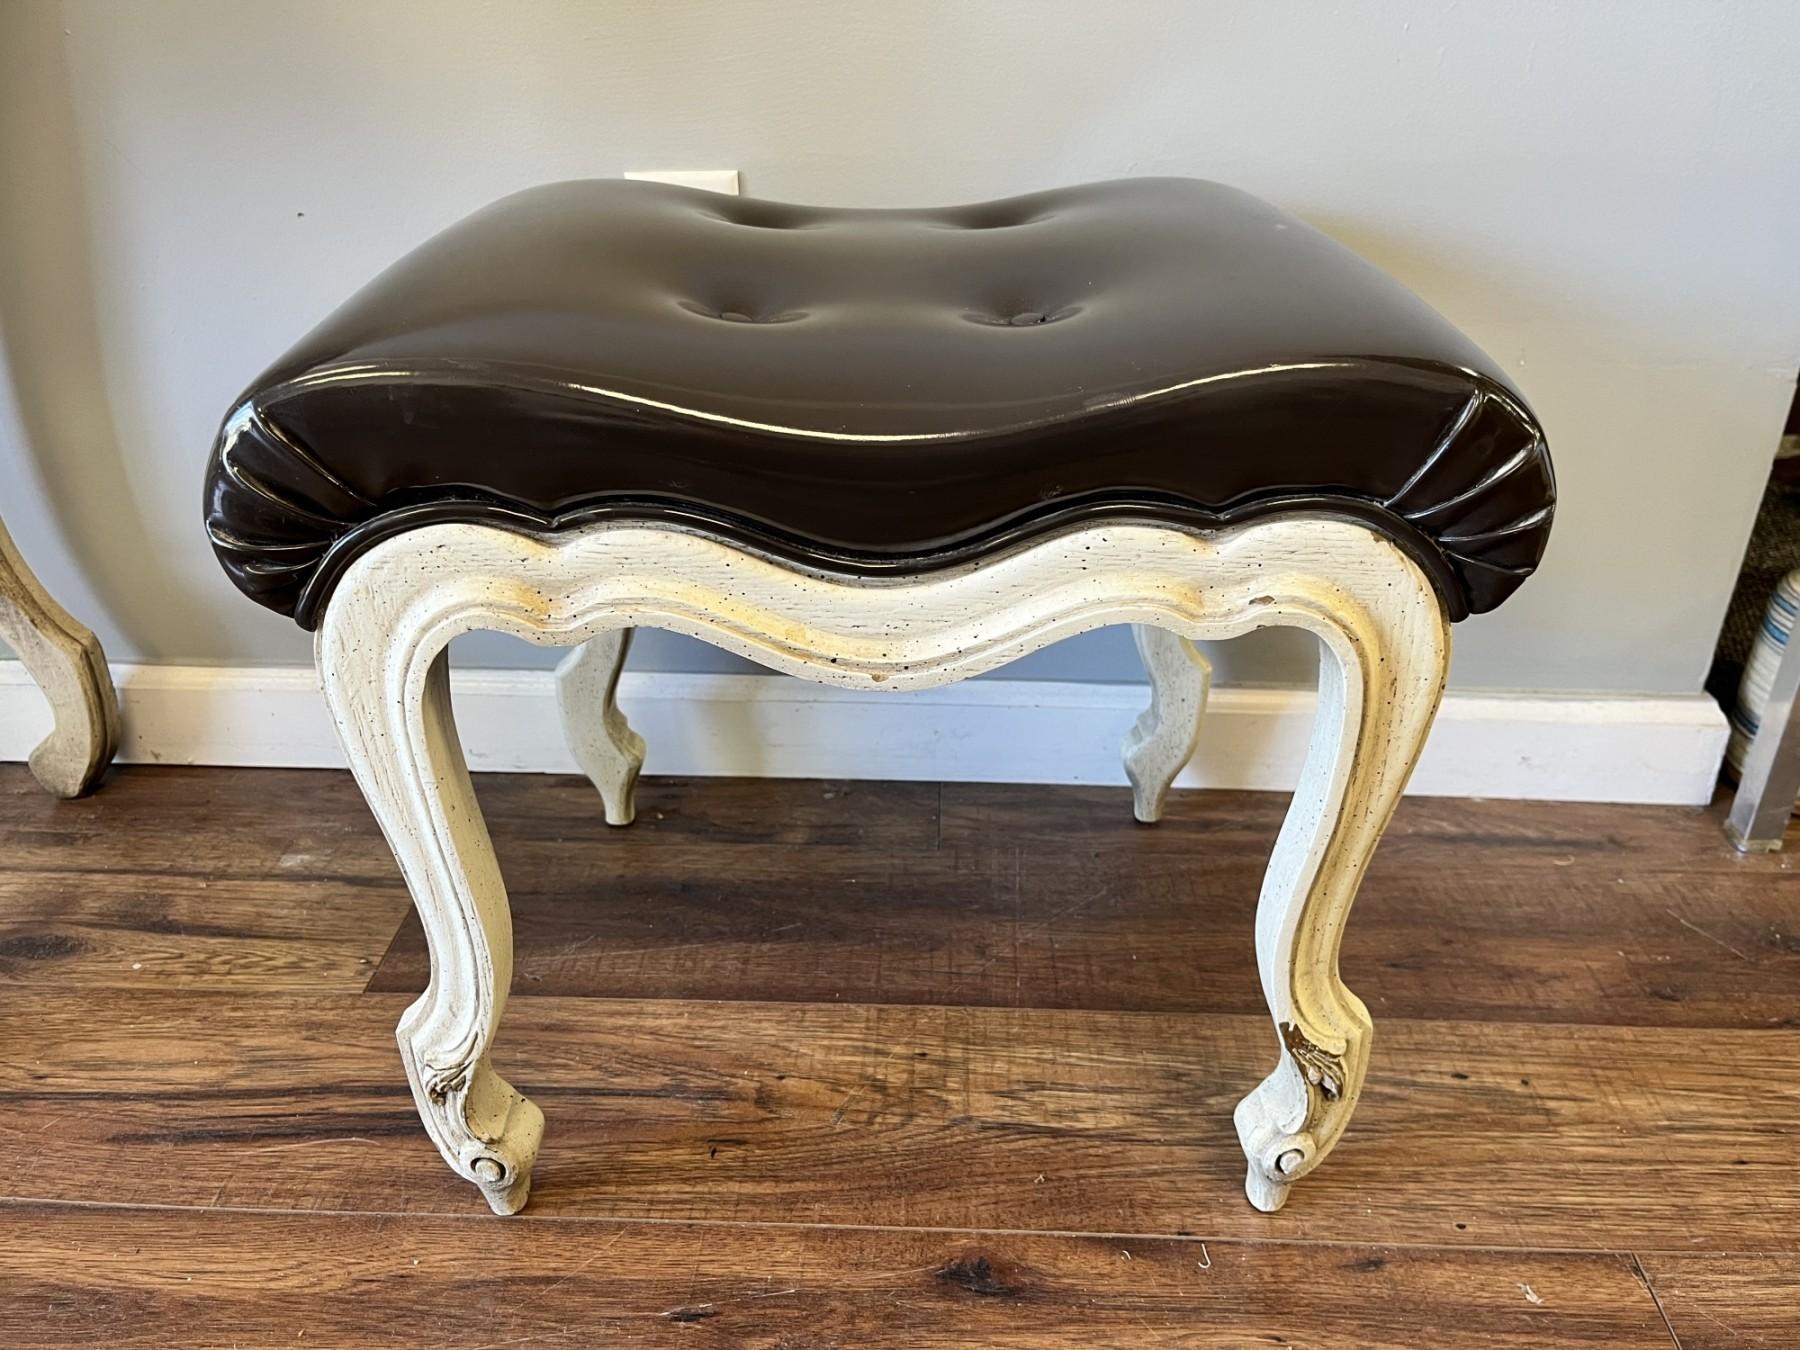 Vintage Provincial Patent Leather Top Vanity With Matching Stool In Good Condition For Sale In W Allenhurst, NJ